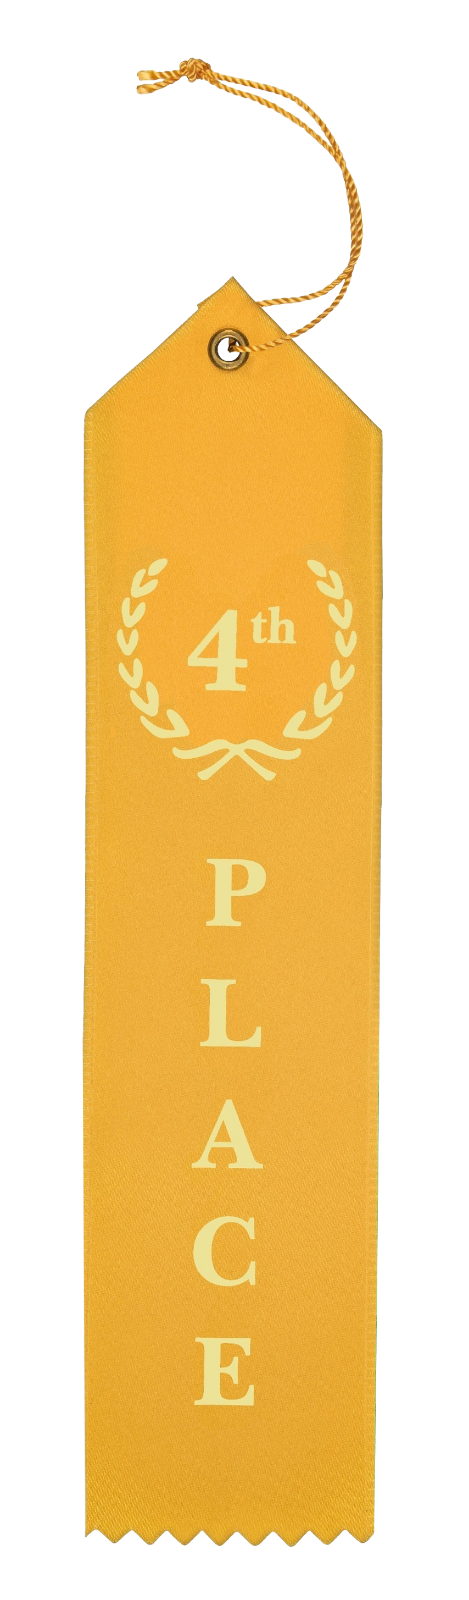 Flat Carded Award Ribbons 1st 2nd 3rd 4th 5th Place, Blue Red White Yellow Green Clinch Star CS-AR-FWC-1-5-60 - фотография #7